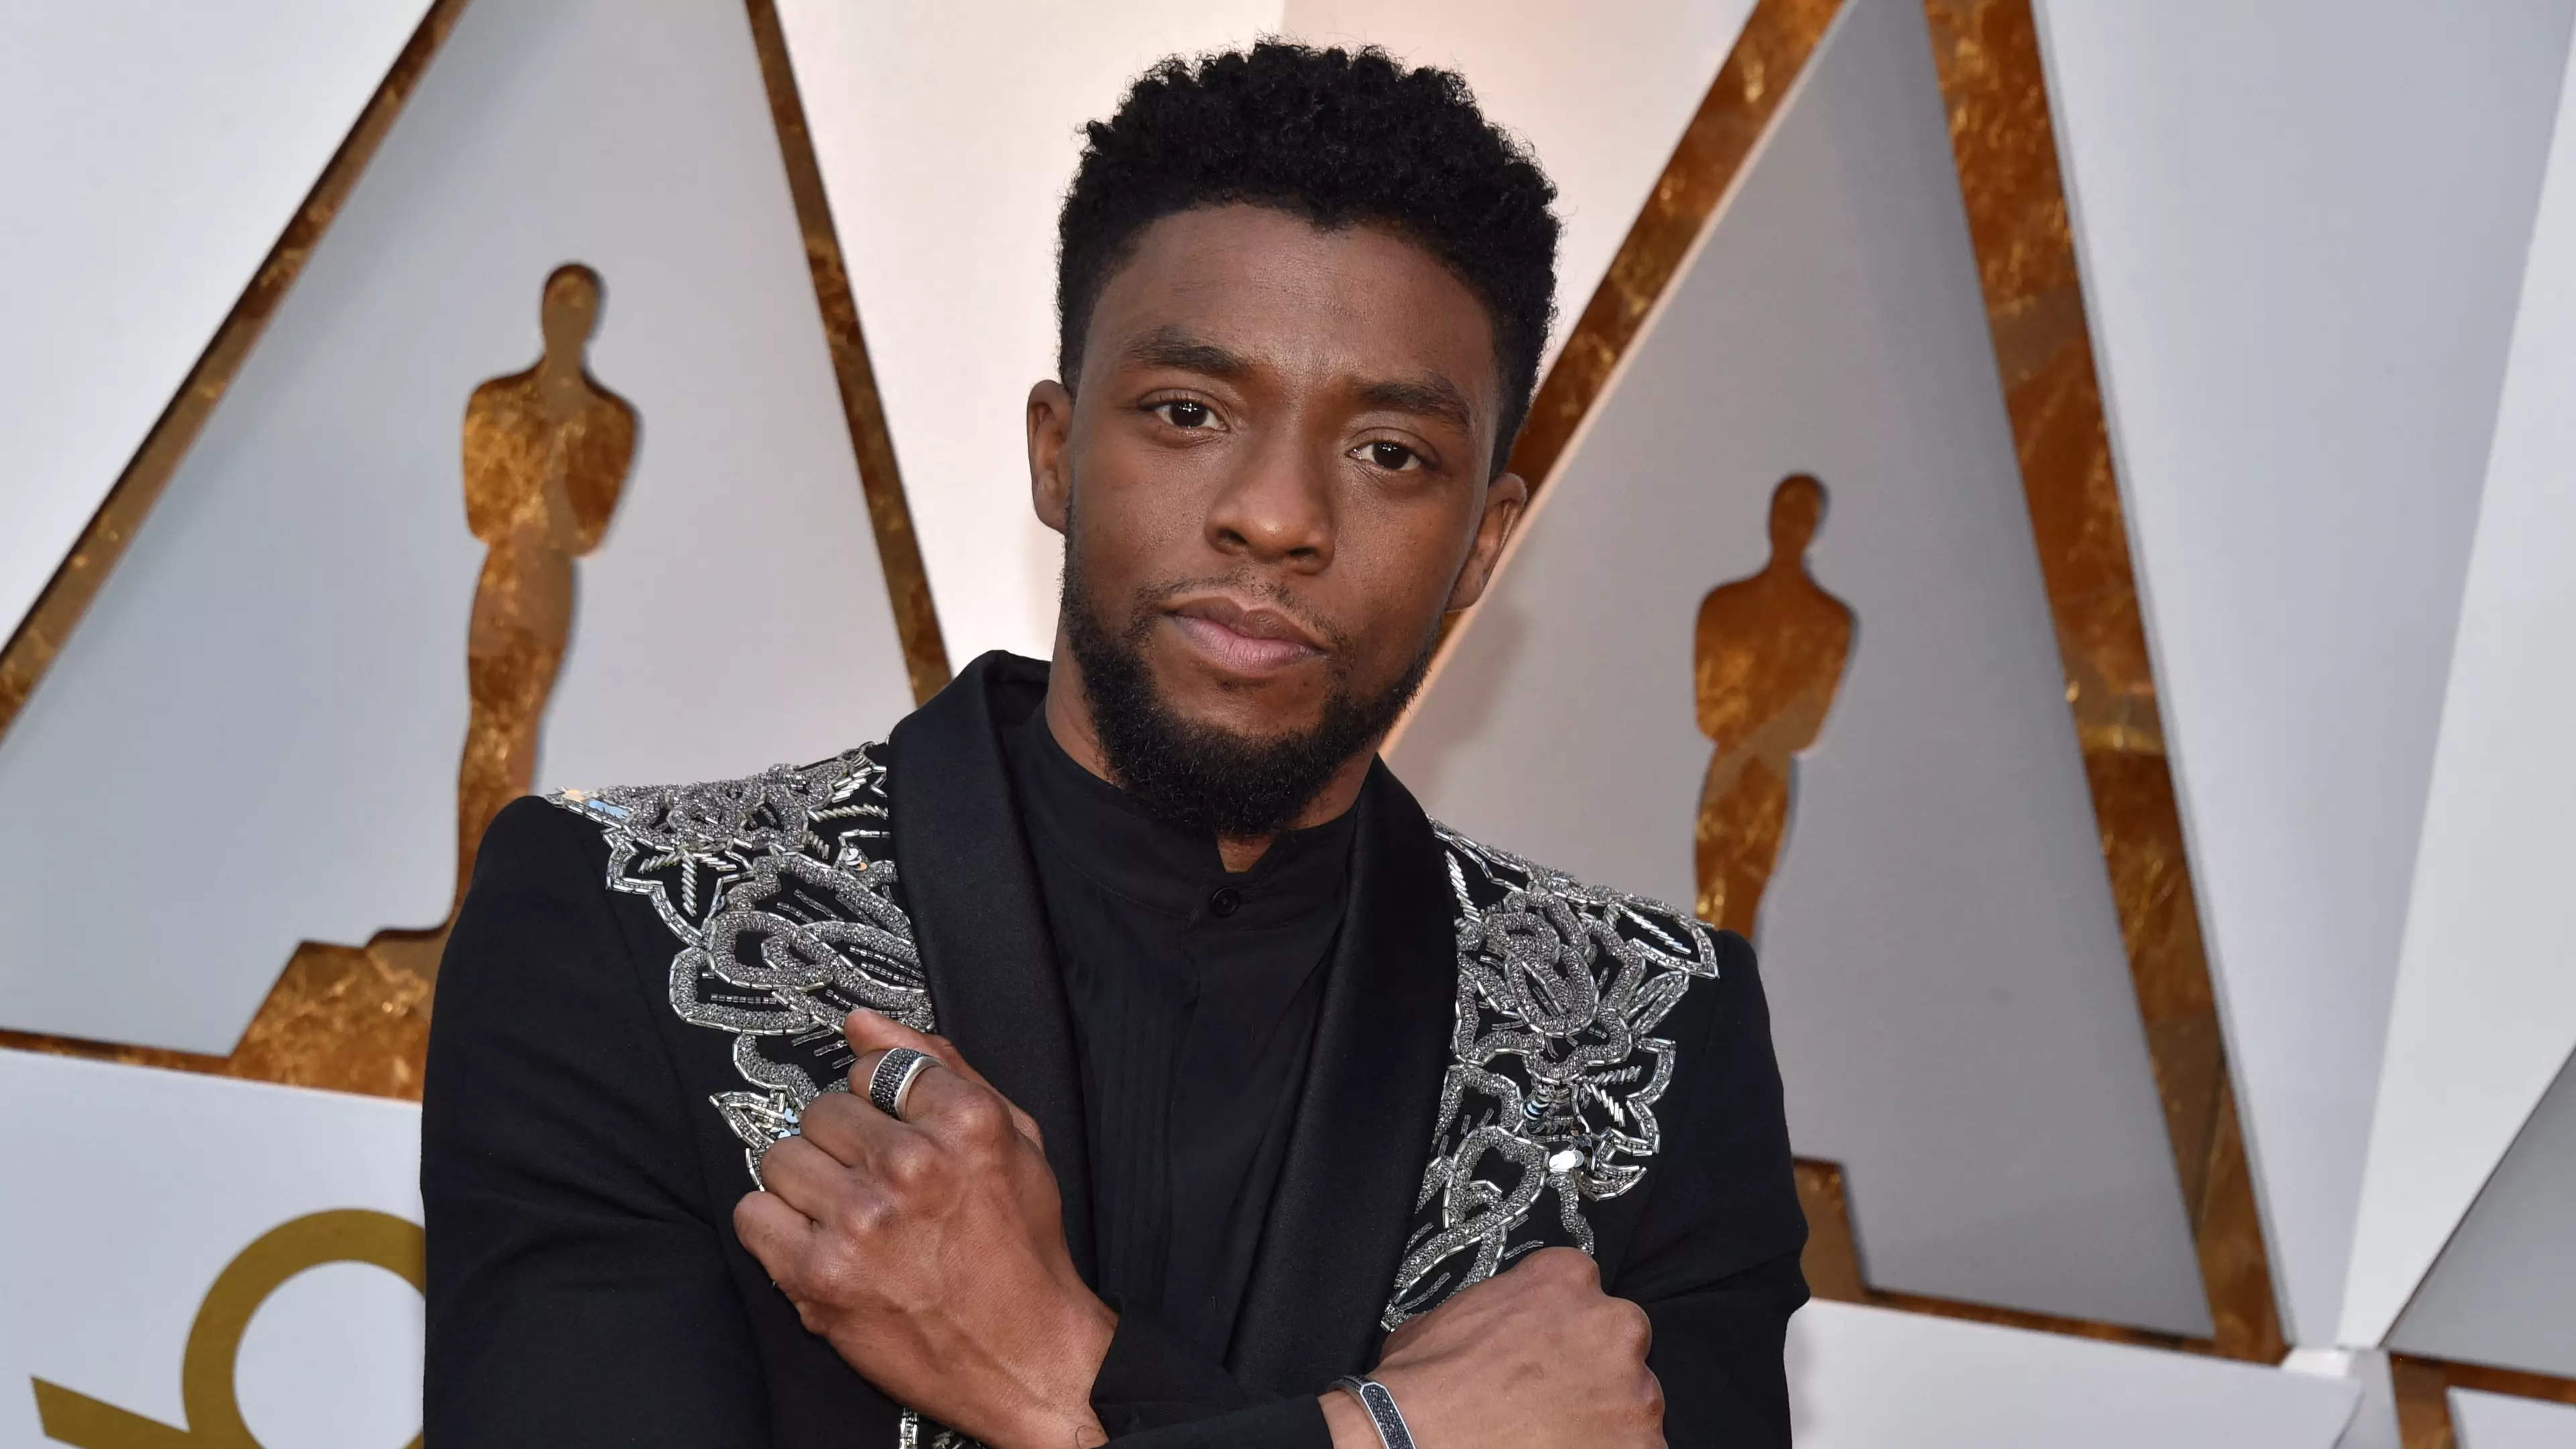 Chadwick Boseman Visited Terminally Ill Kids While Fighting His Own Cancer Battle